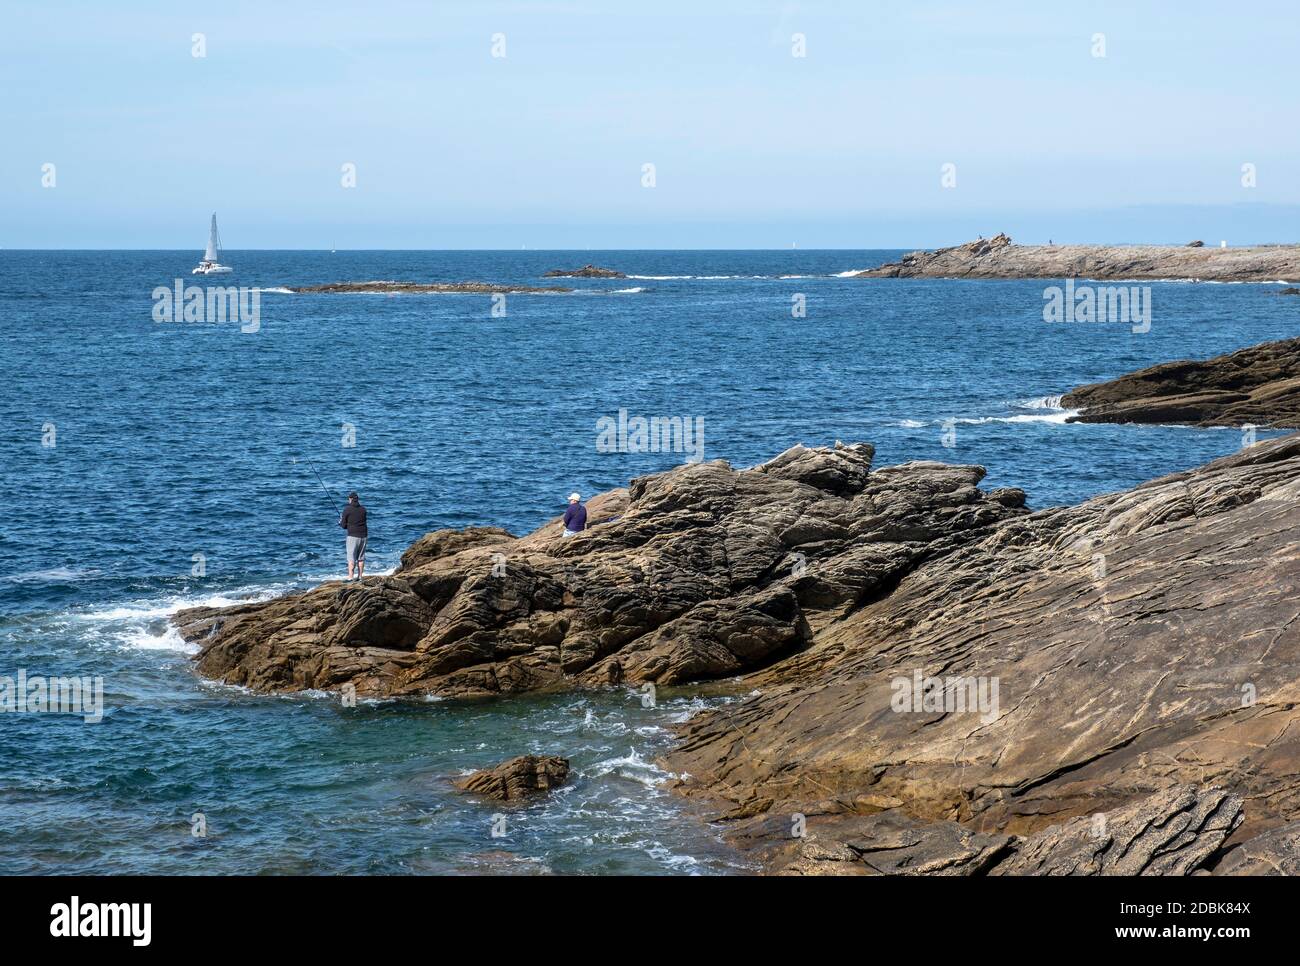 Man fishing on the rocks with a female companion and a yacht sailing past, at The Cote Sauvage on The Quiberon Peninsula, Brittany, France. Stock Photo